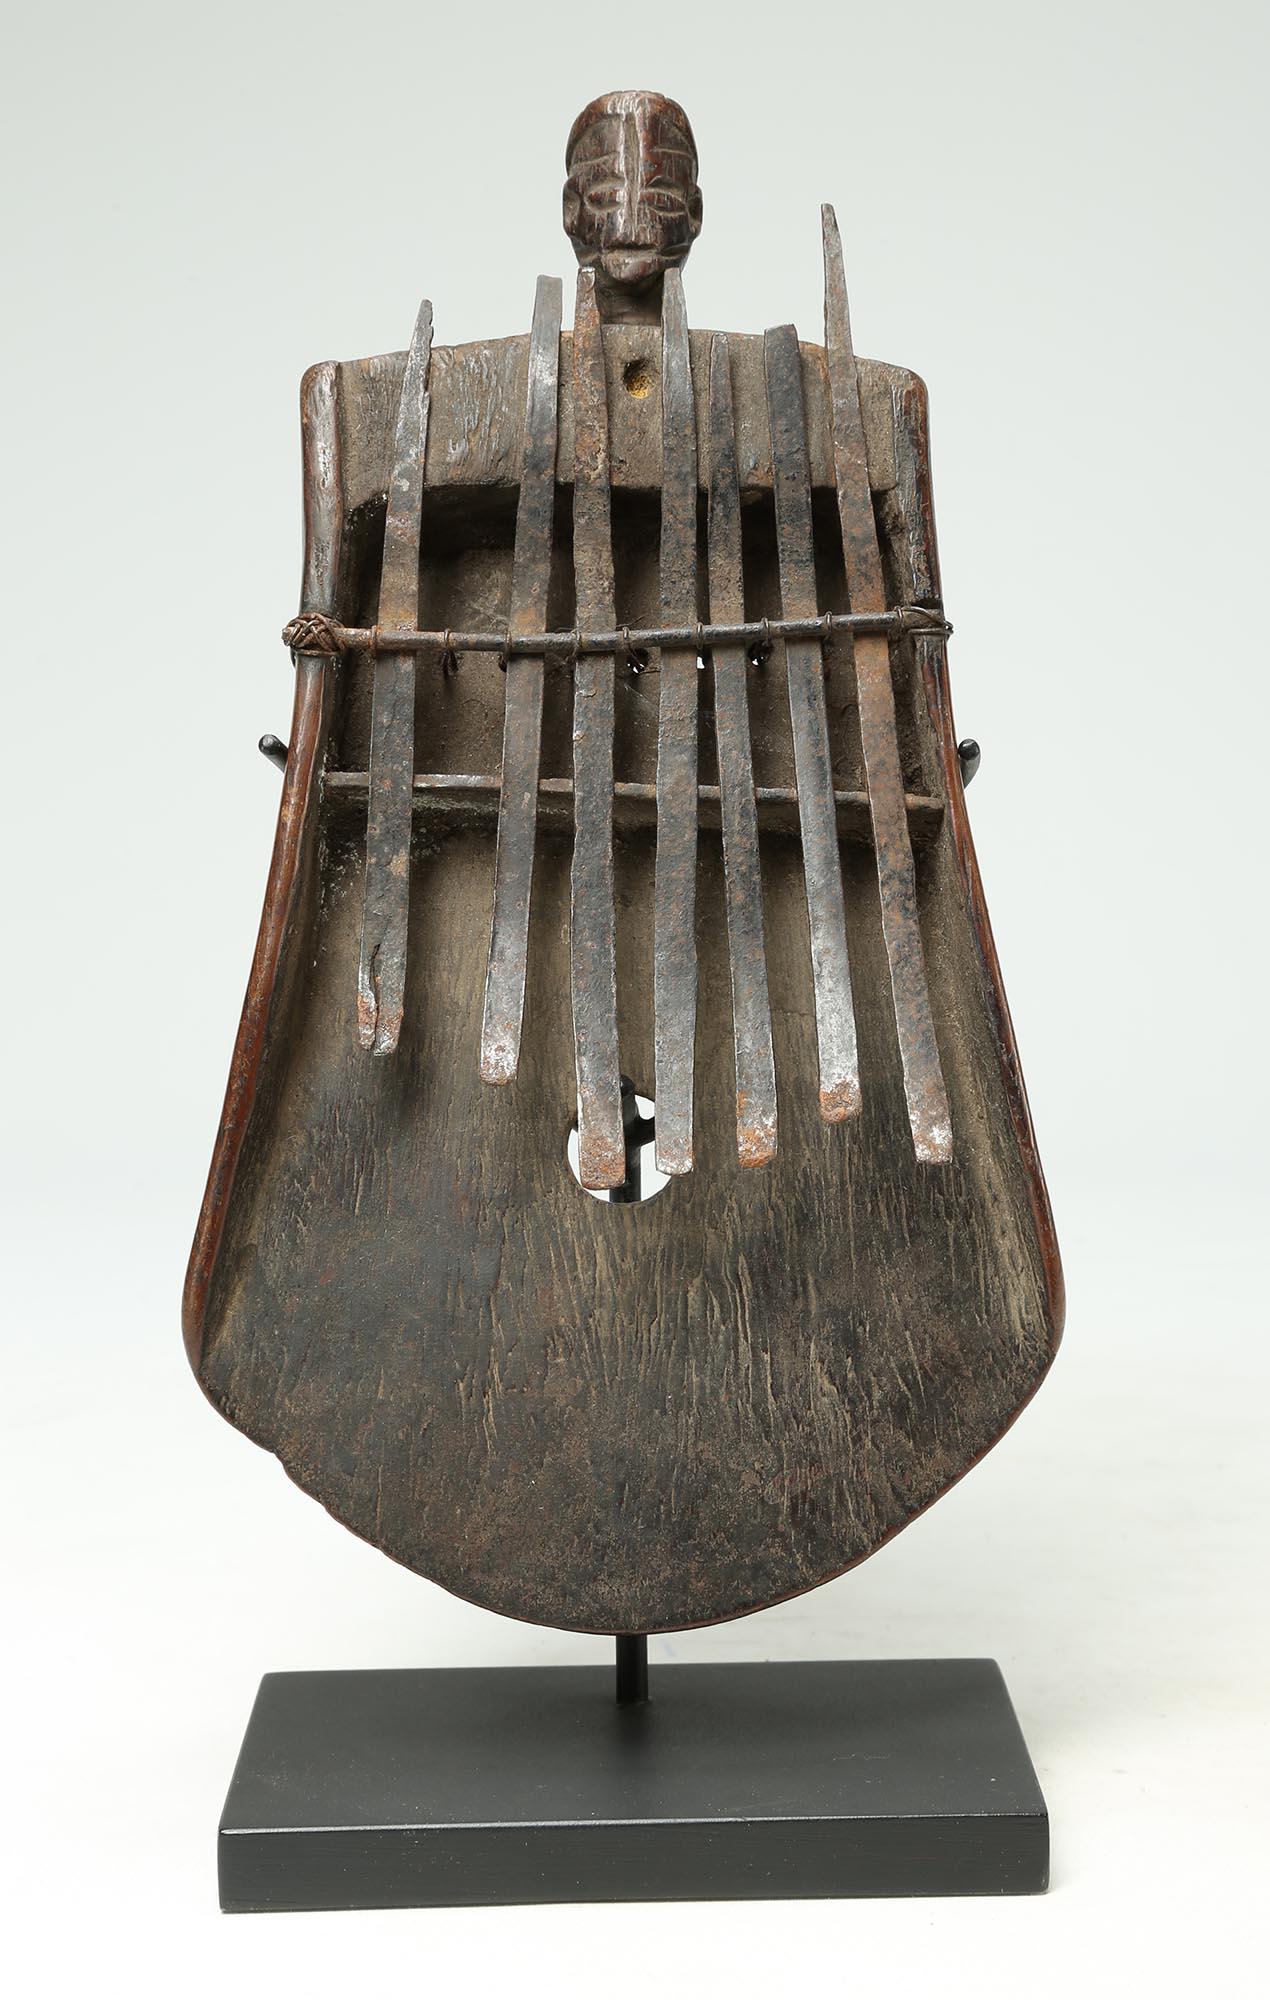 Carved worn wood Mbira or Sanza (once known as a thumb piano) with metal strikers from the early period in the Congo, Central Africa. On top is a subtly carved human face with great wear and patina from handling. Late 19th to early 20th century. The